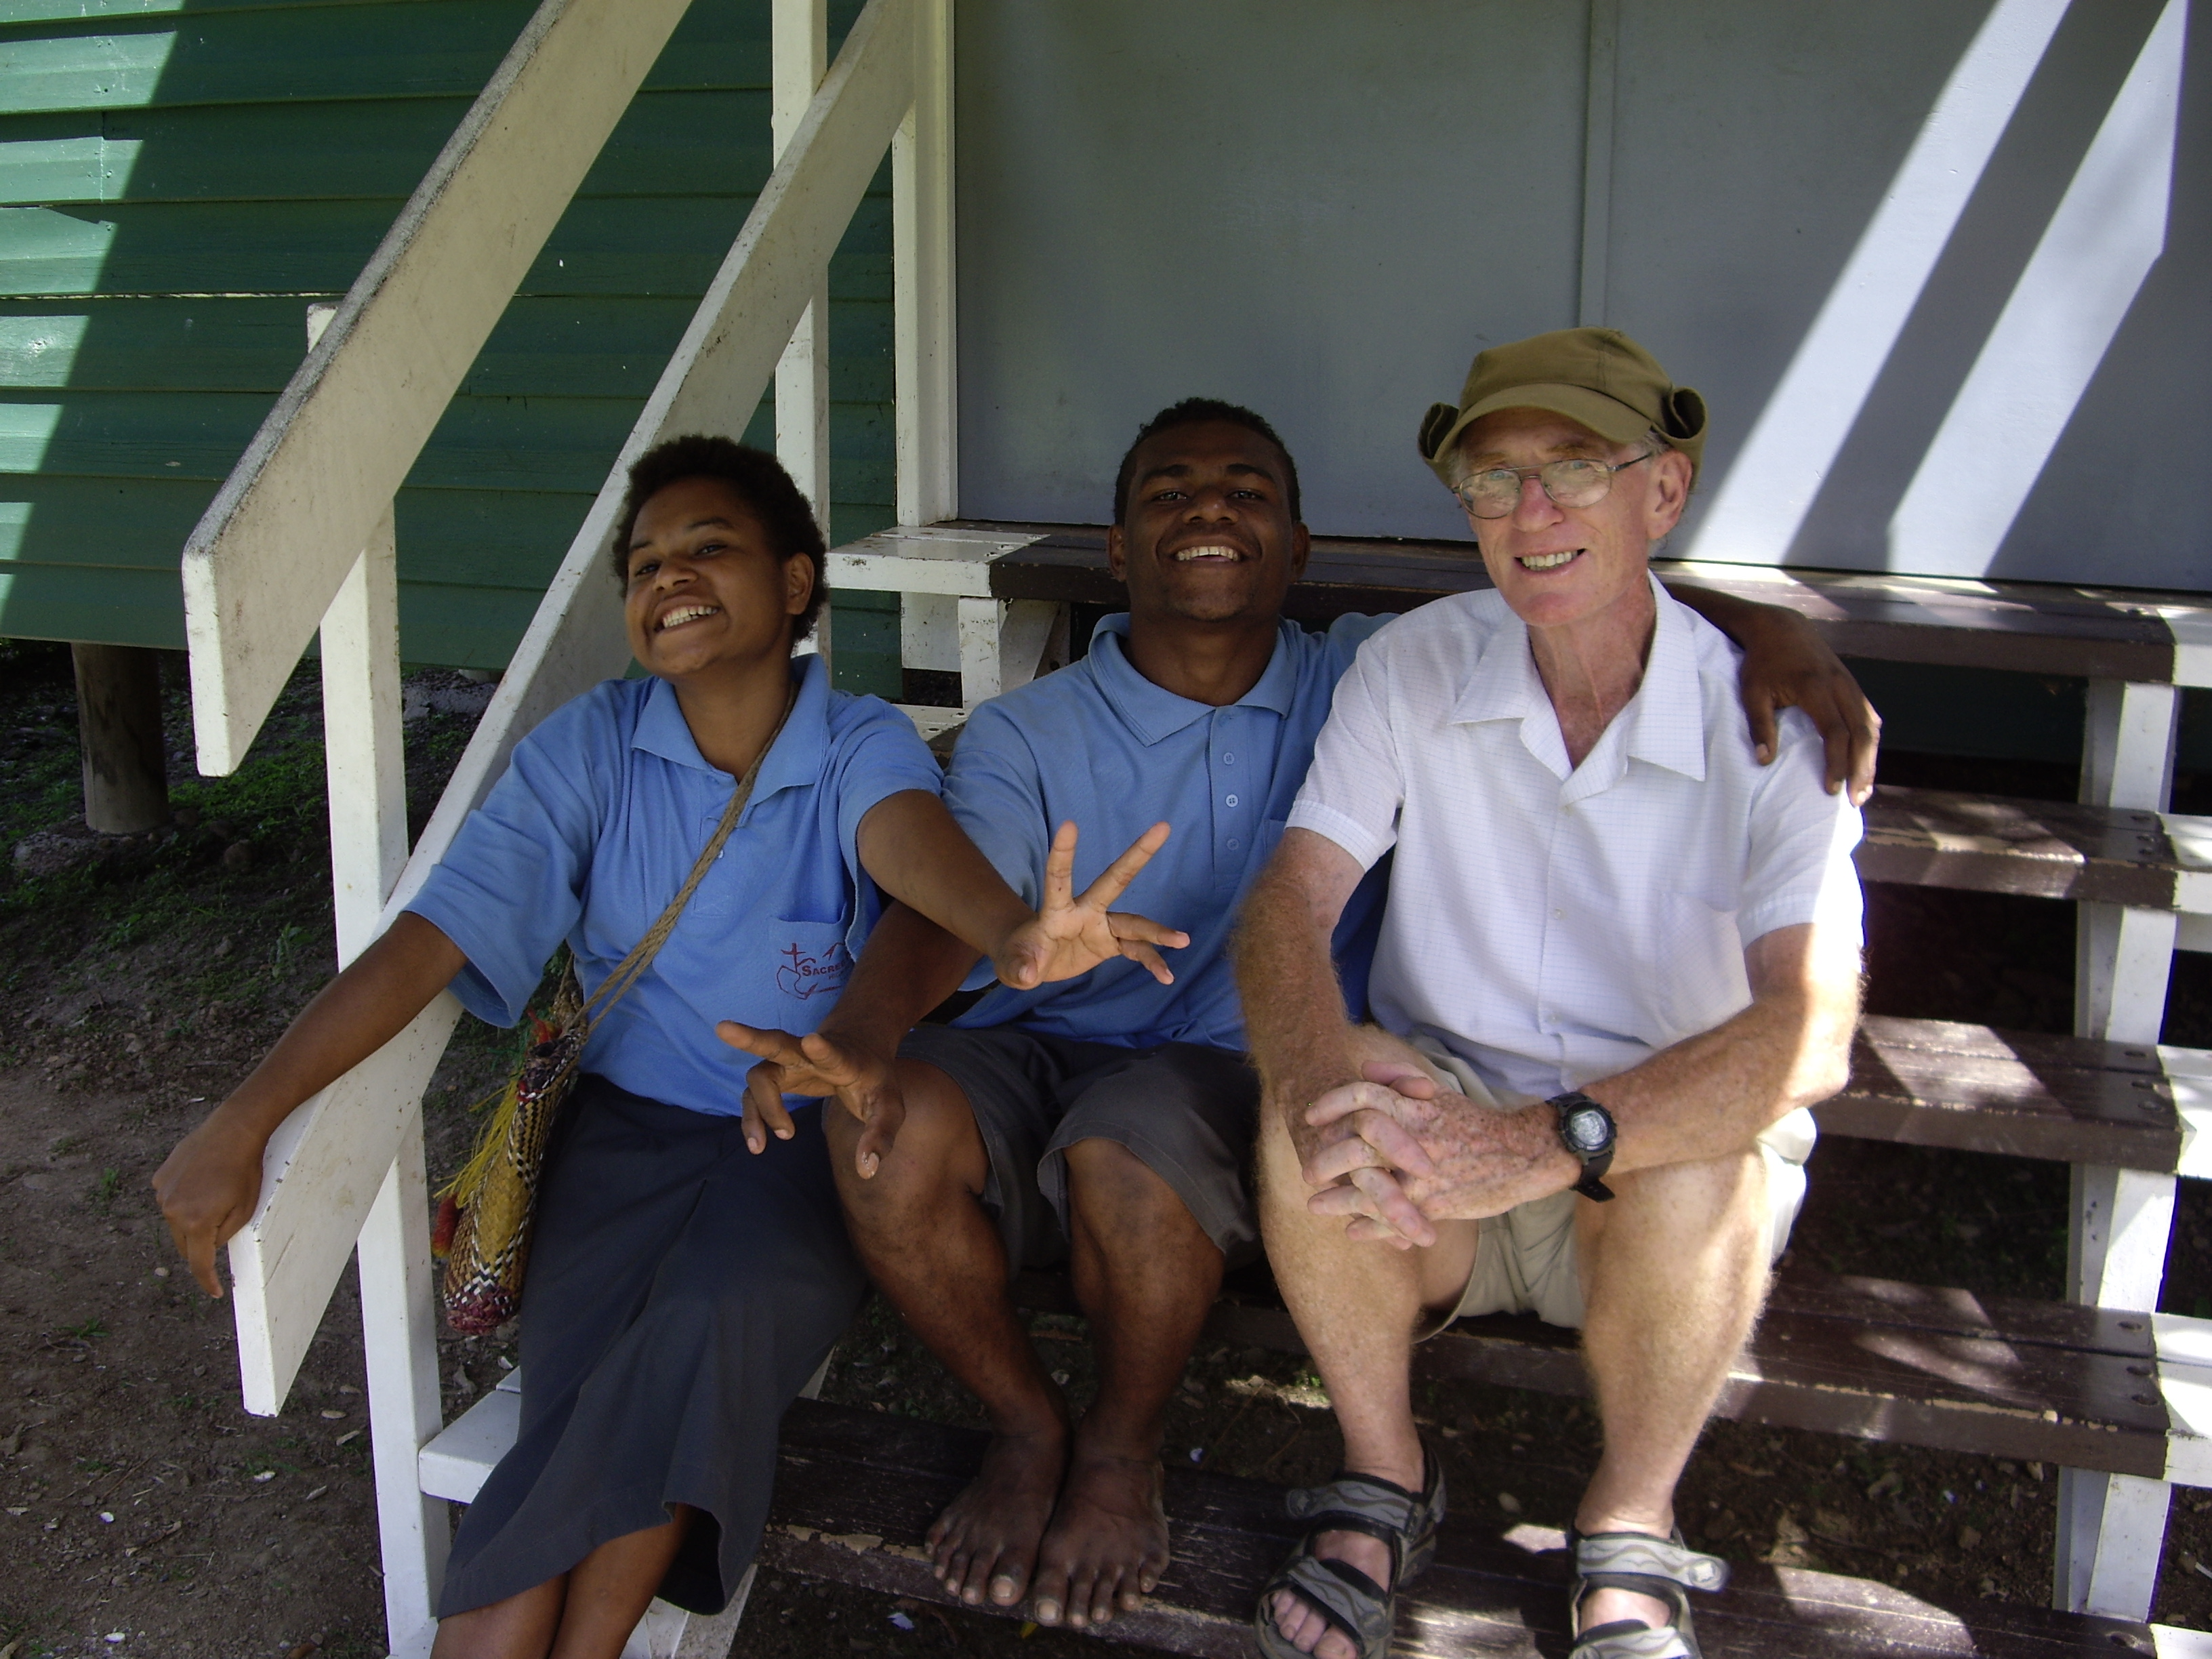 Palms Australia volunteer Des with two students on the library steps in Tapini